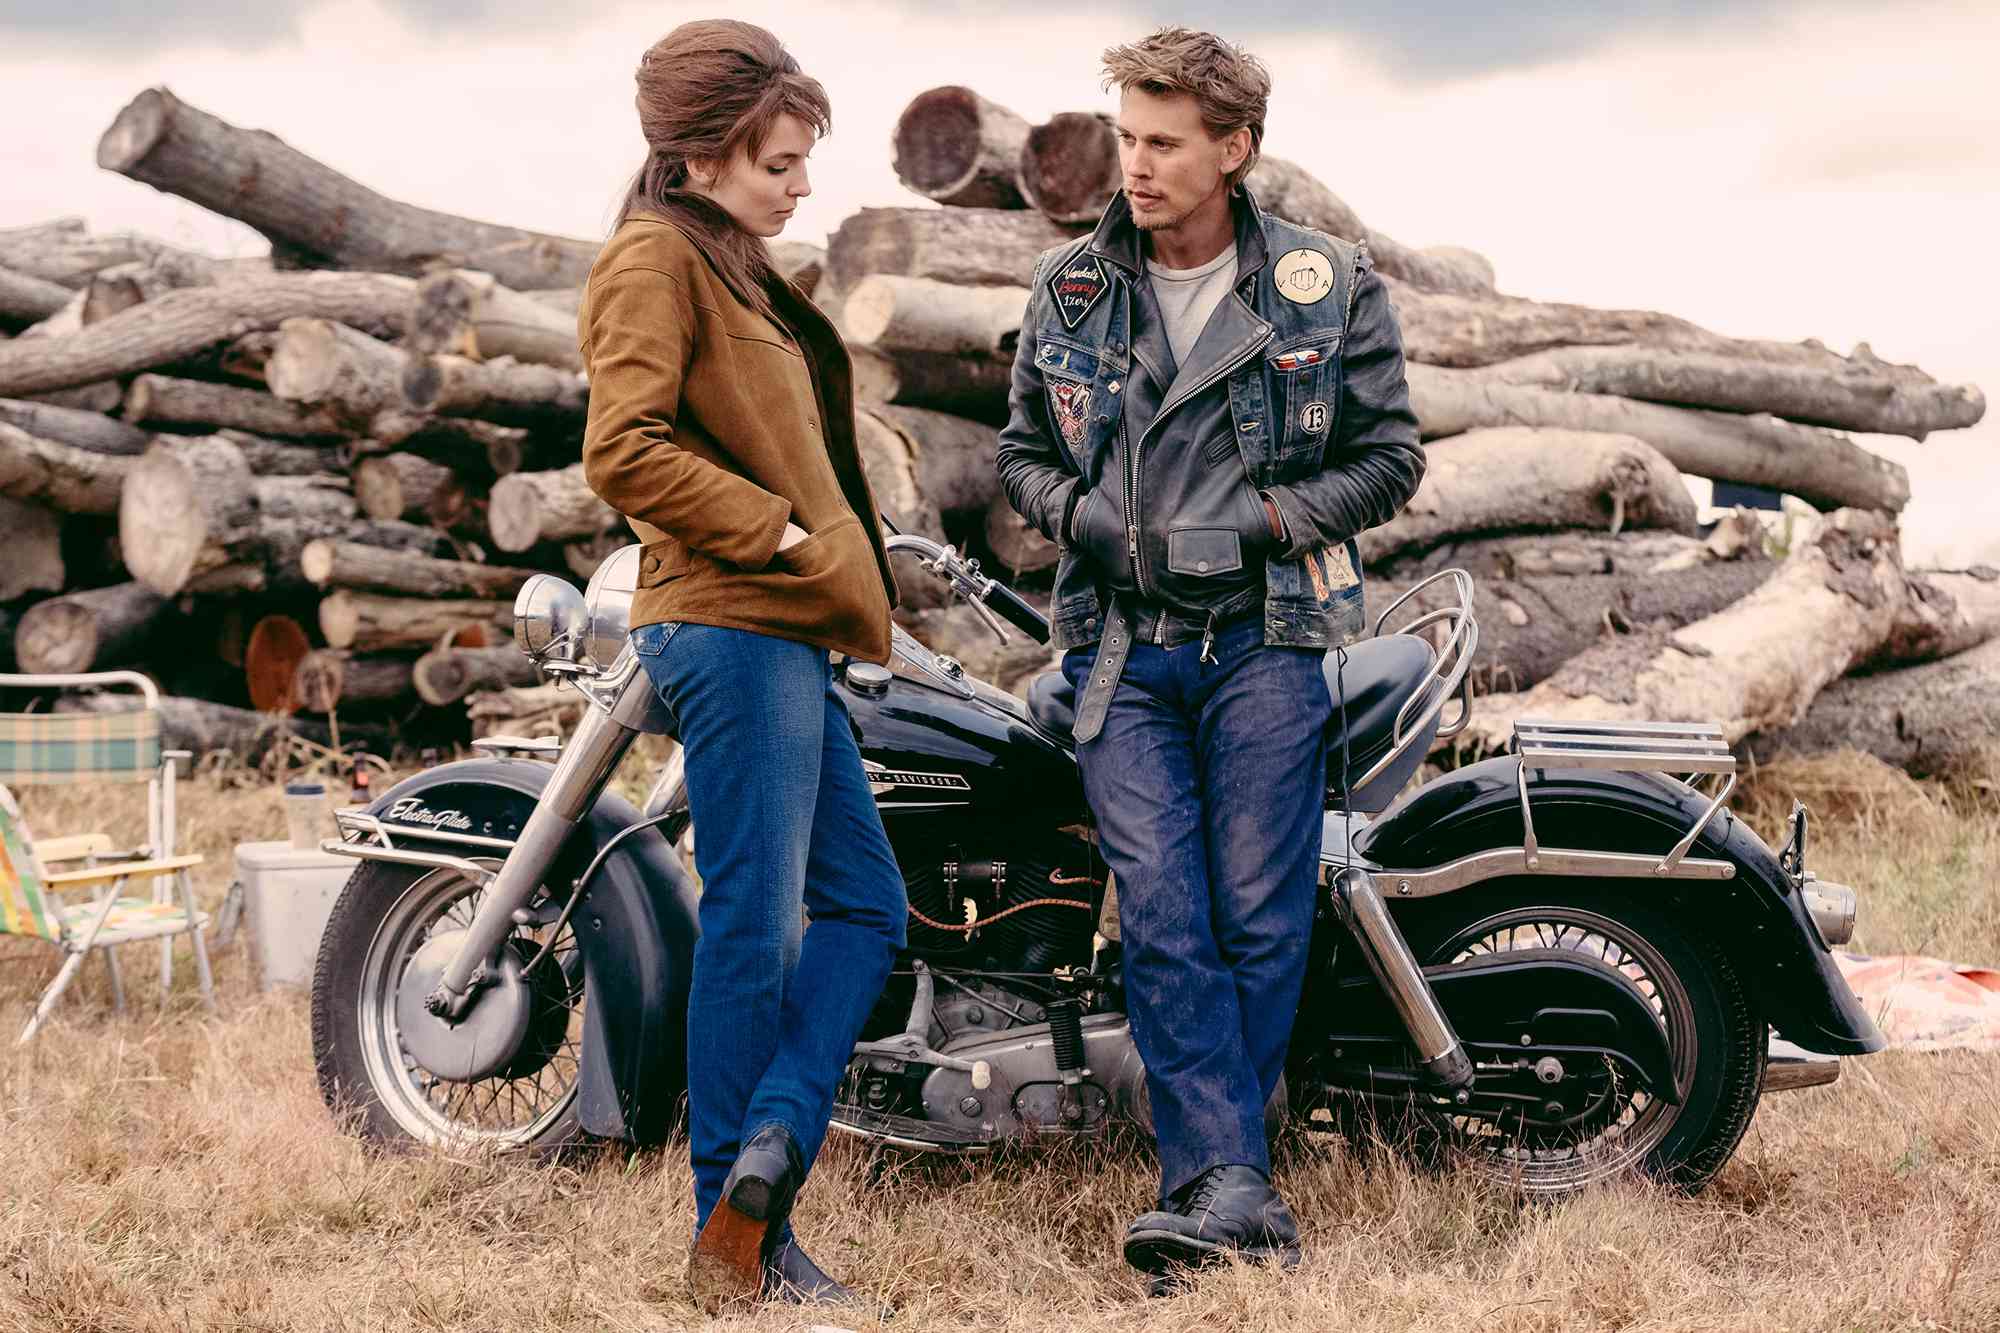 Jodie Comer as Kathy and Austin Butler as Benny in director Jeff Nichols' THE BIKERIDERS, a Focus Features release.